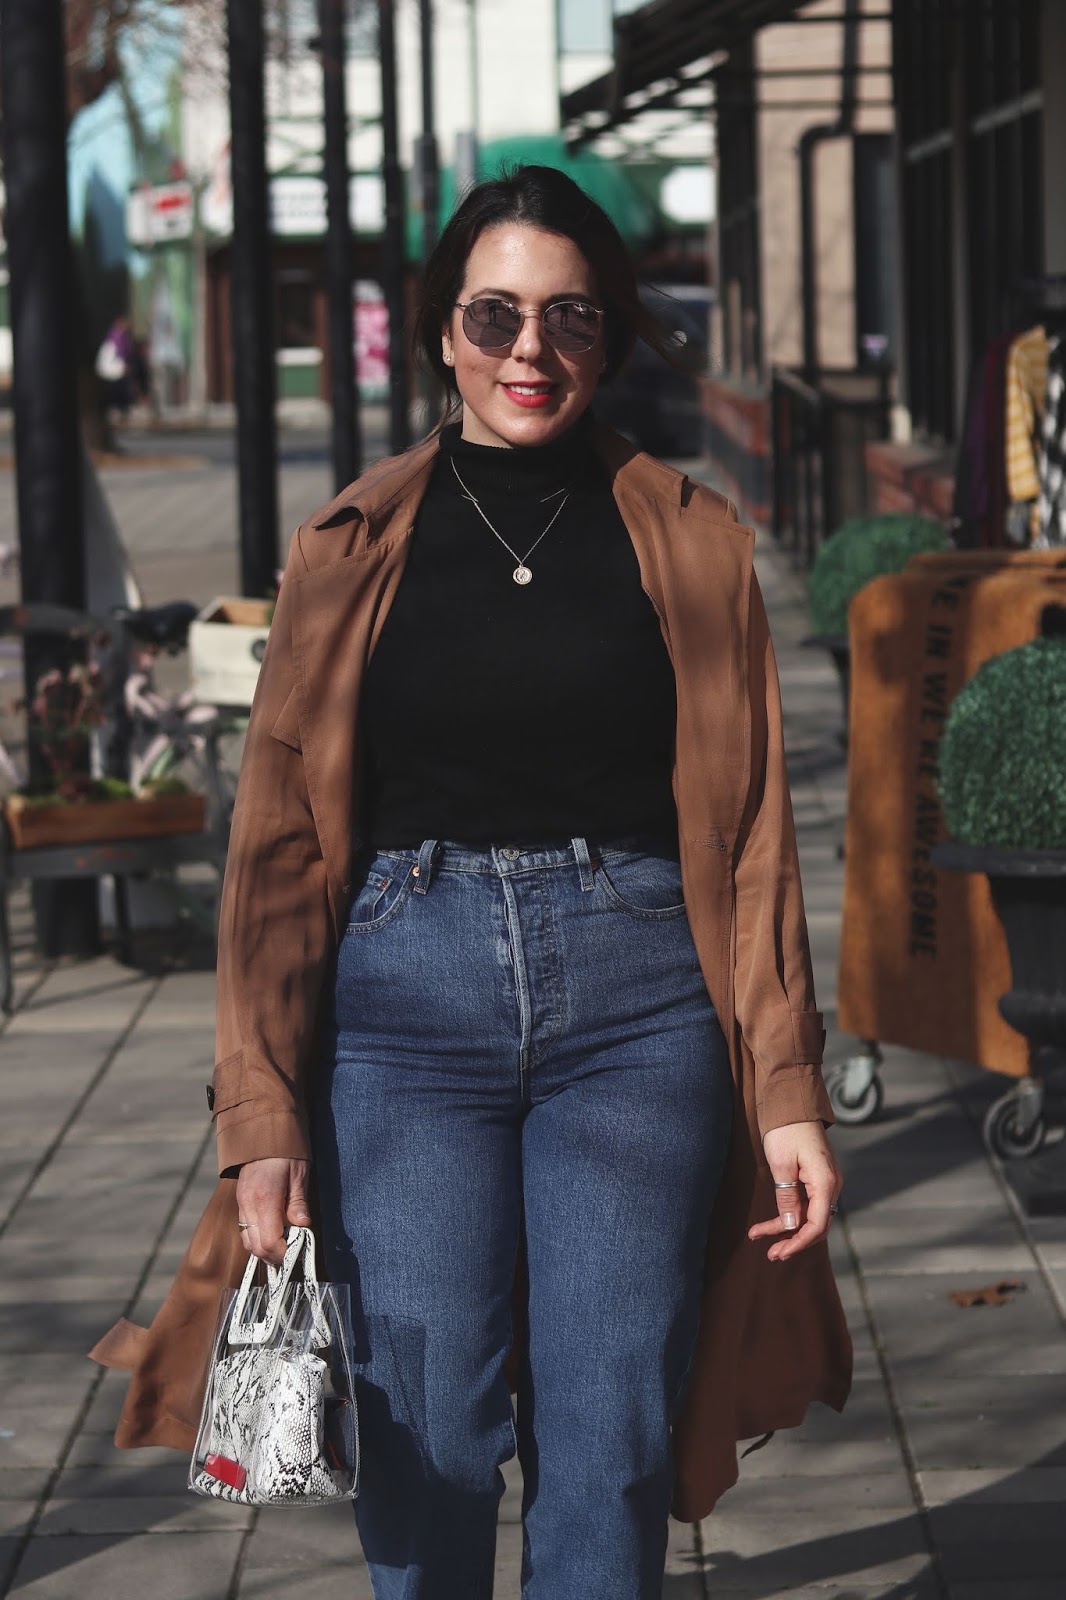 Le Chateau trench coat spring outfit idea levi's ribcage jeans bailey nelson sunglasses vancouver blogger aleesha harris